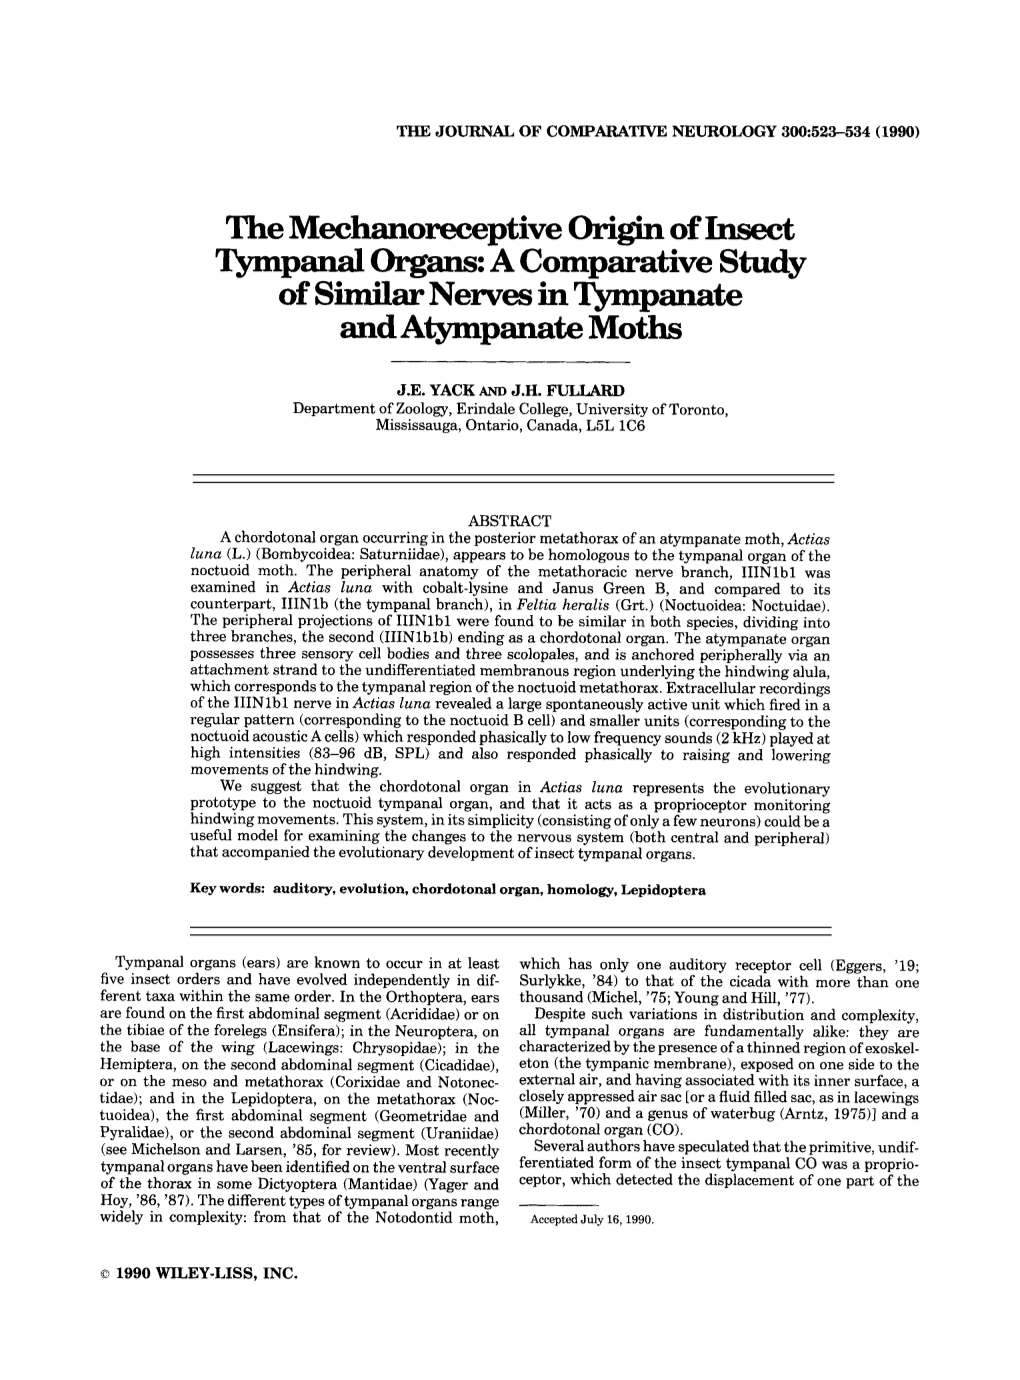 The Mechanoreceptive Origin of Insect Tympanal Organs: Acomparative Study of Similar Nervesintympanate Andatpnpanate Moths